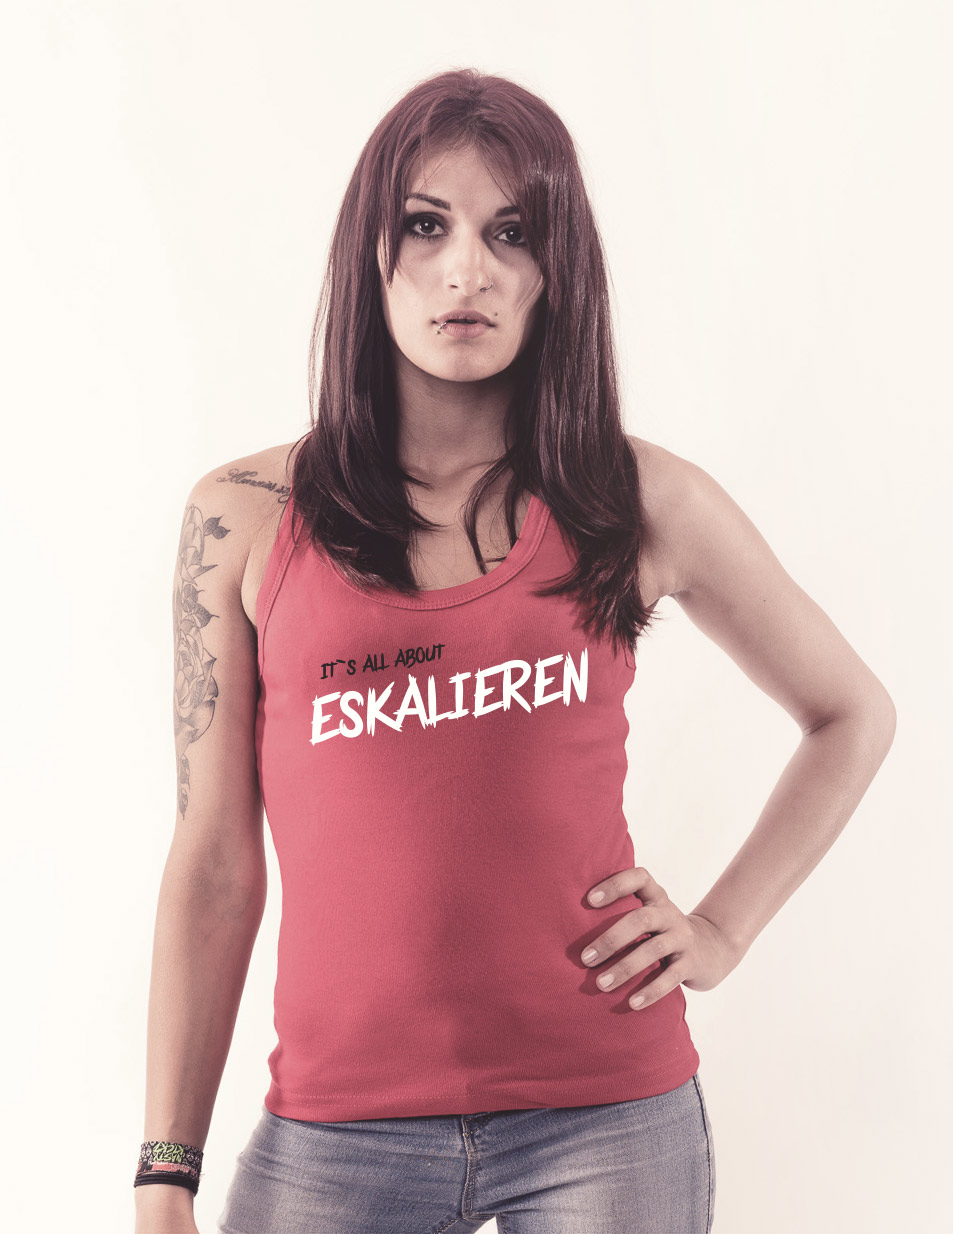 Its all about Eskalieren - Girly Tank Top Pink Edition blau